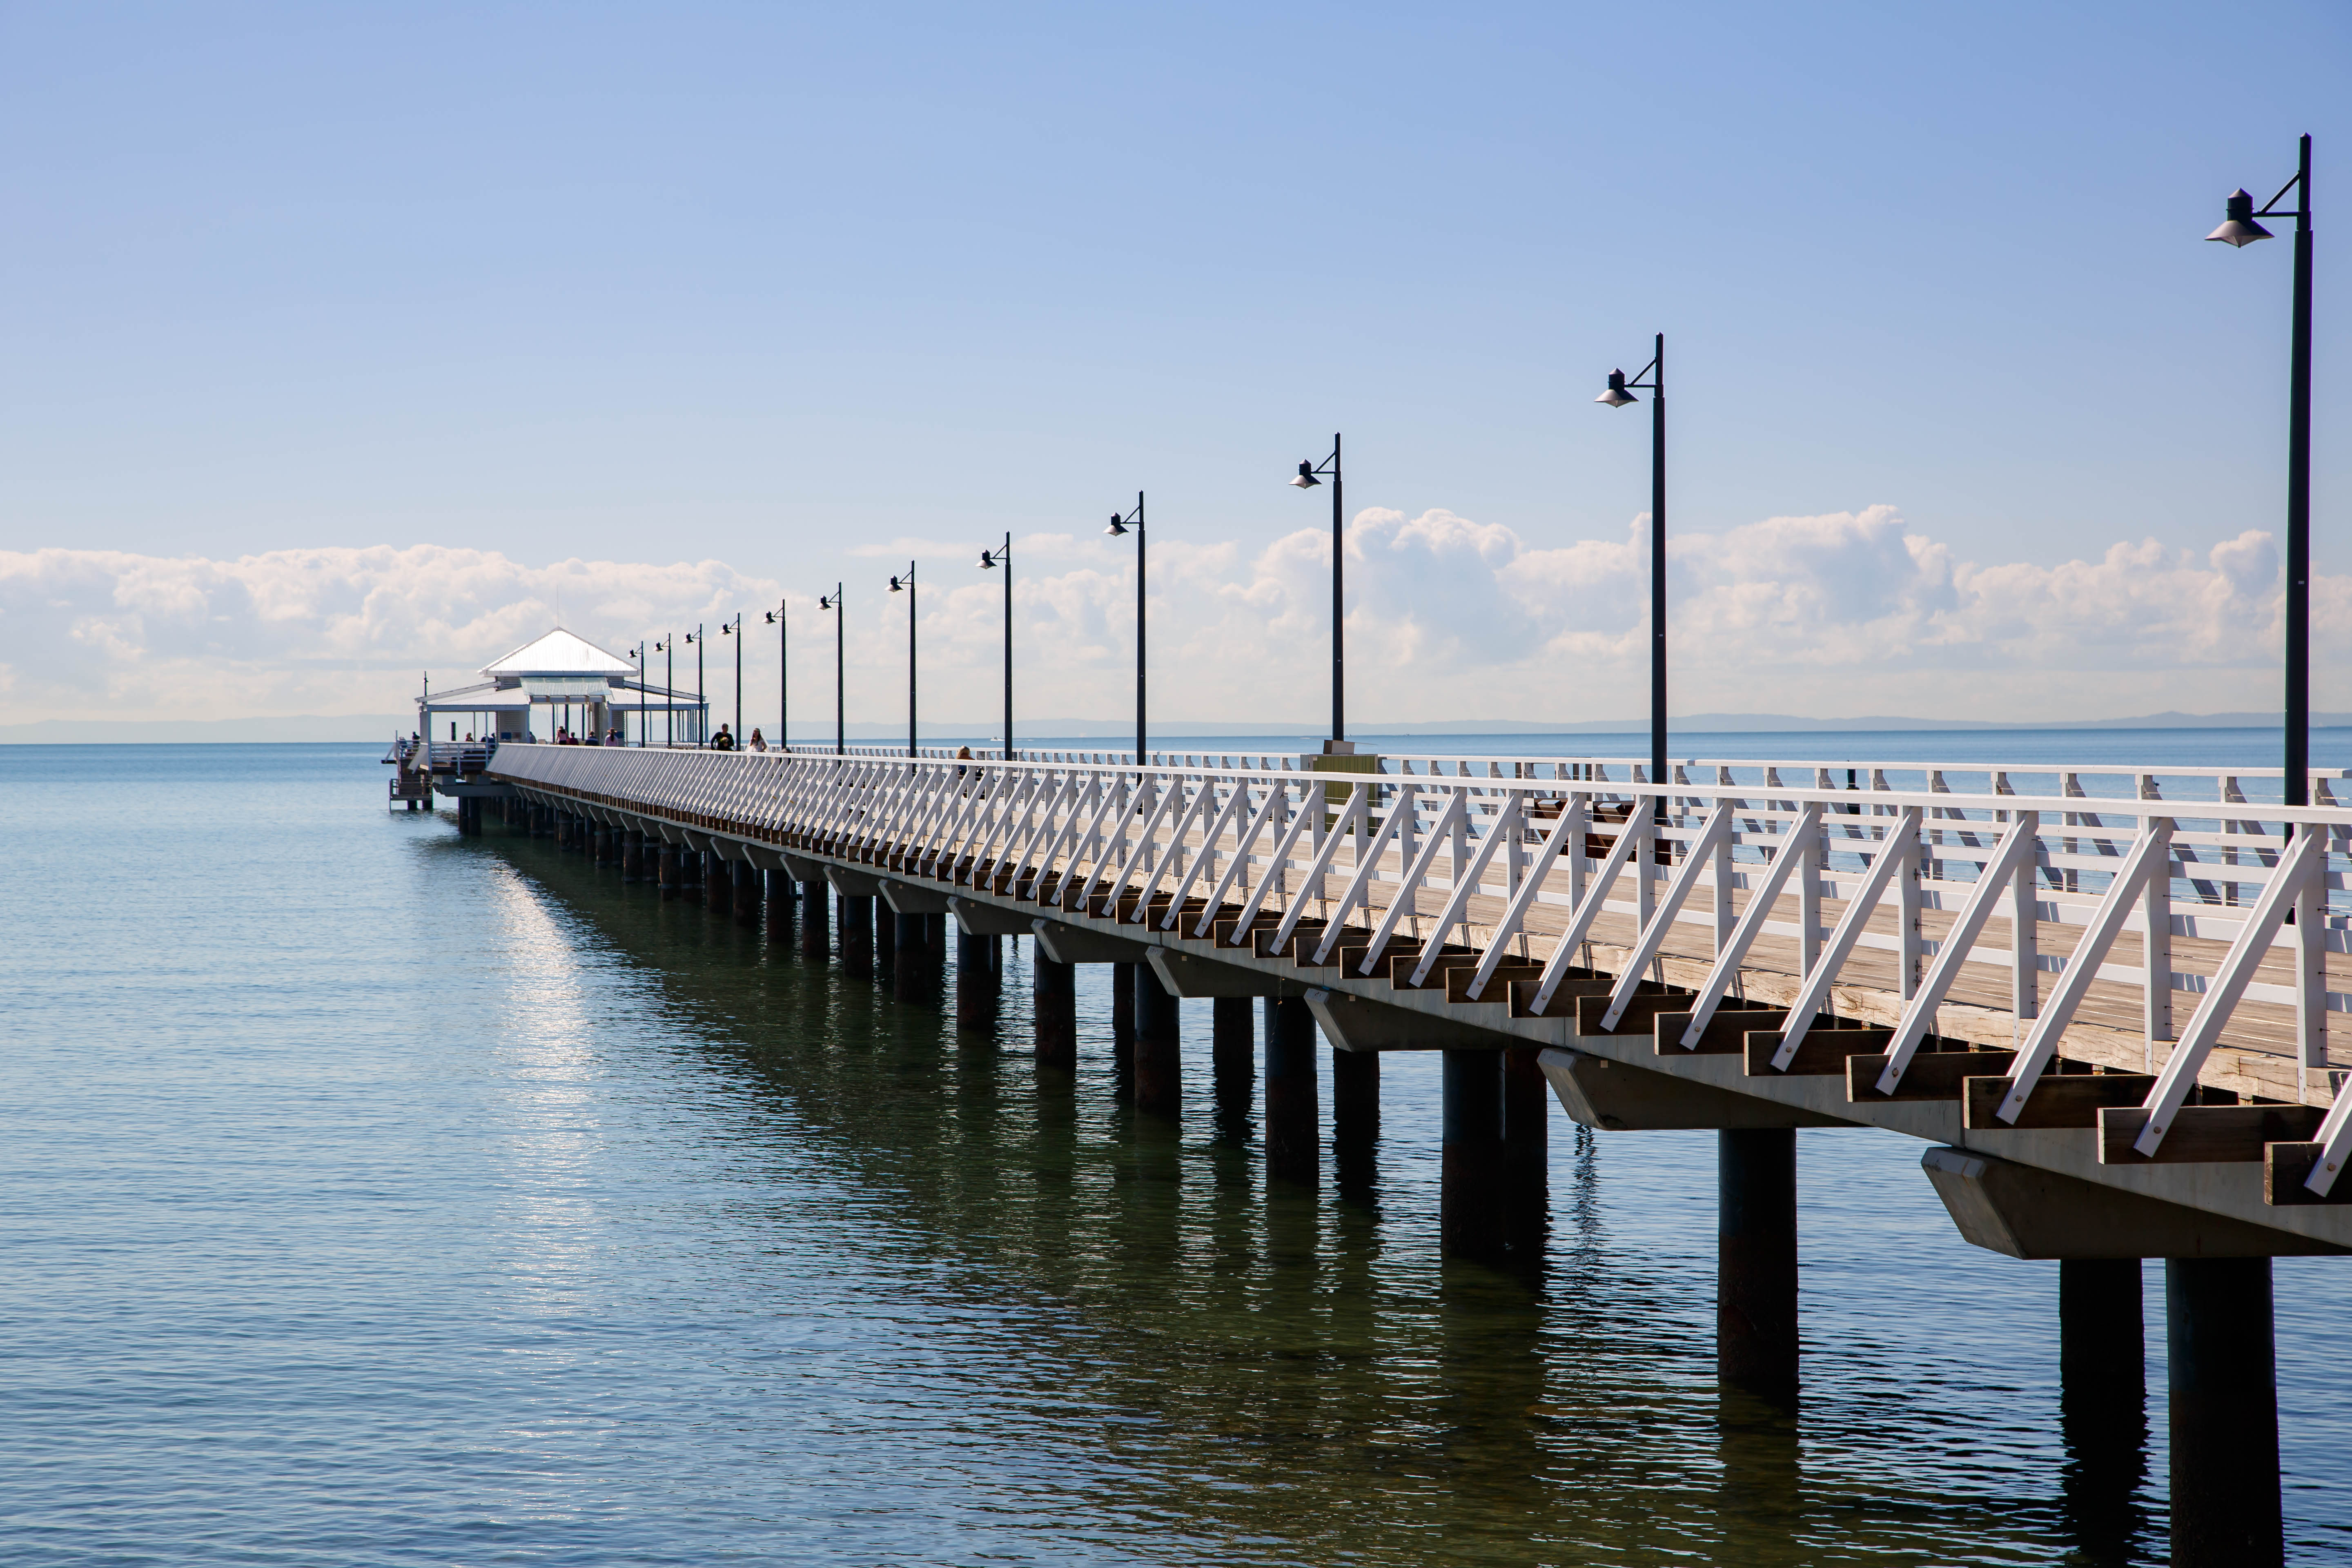 This is an image of the Shorncliffe Pier